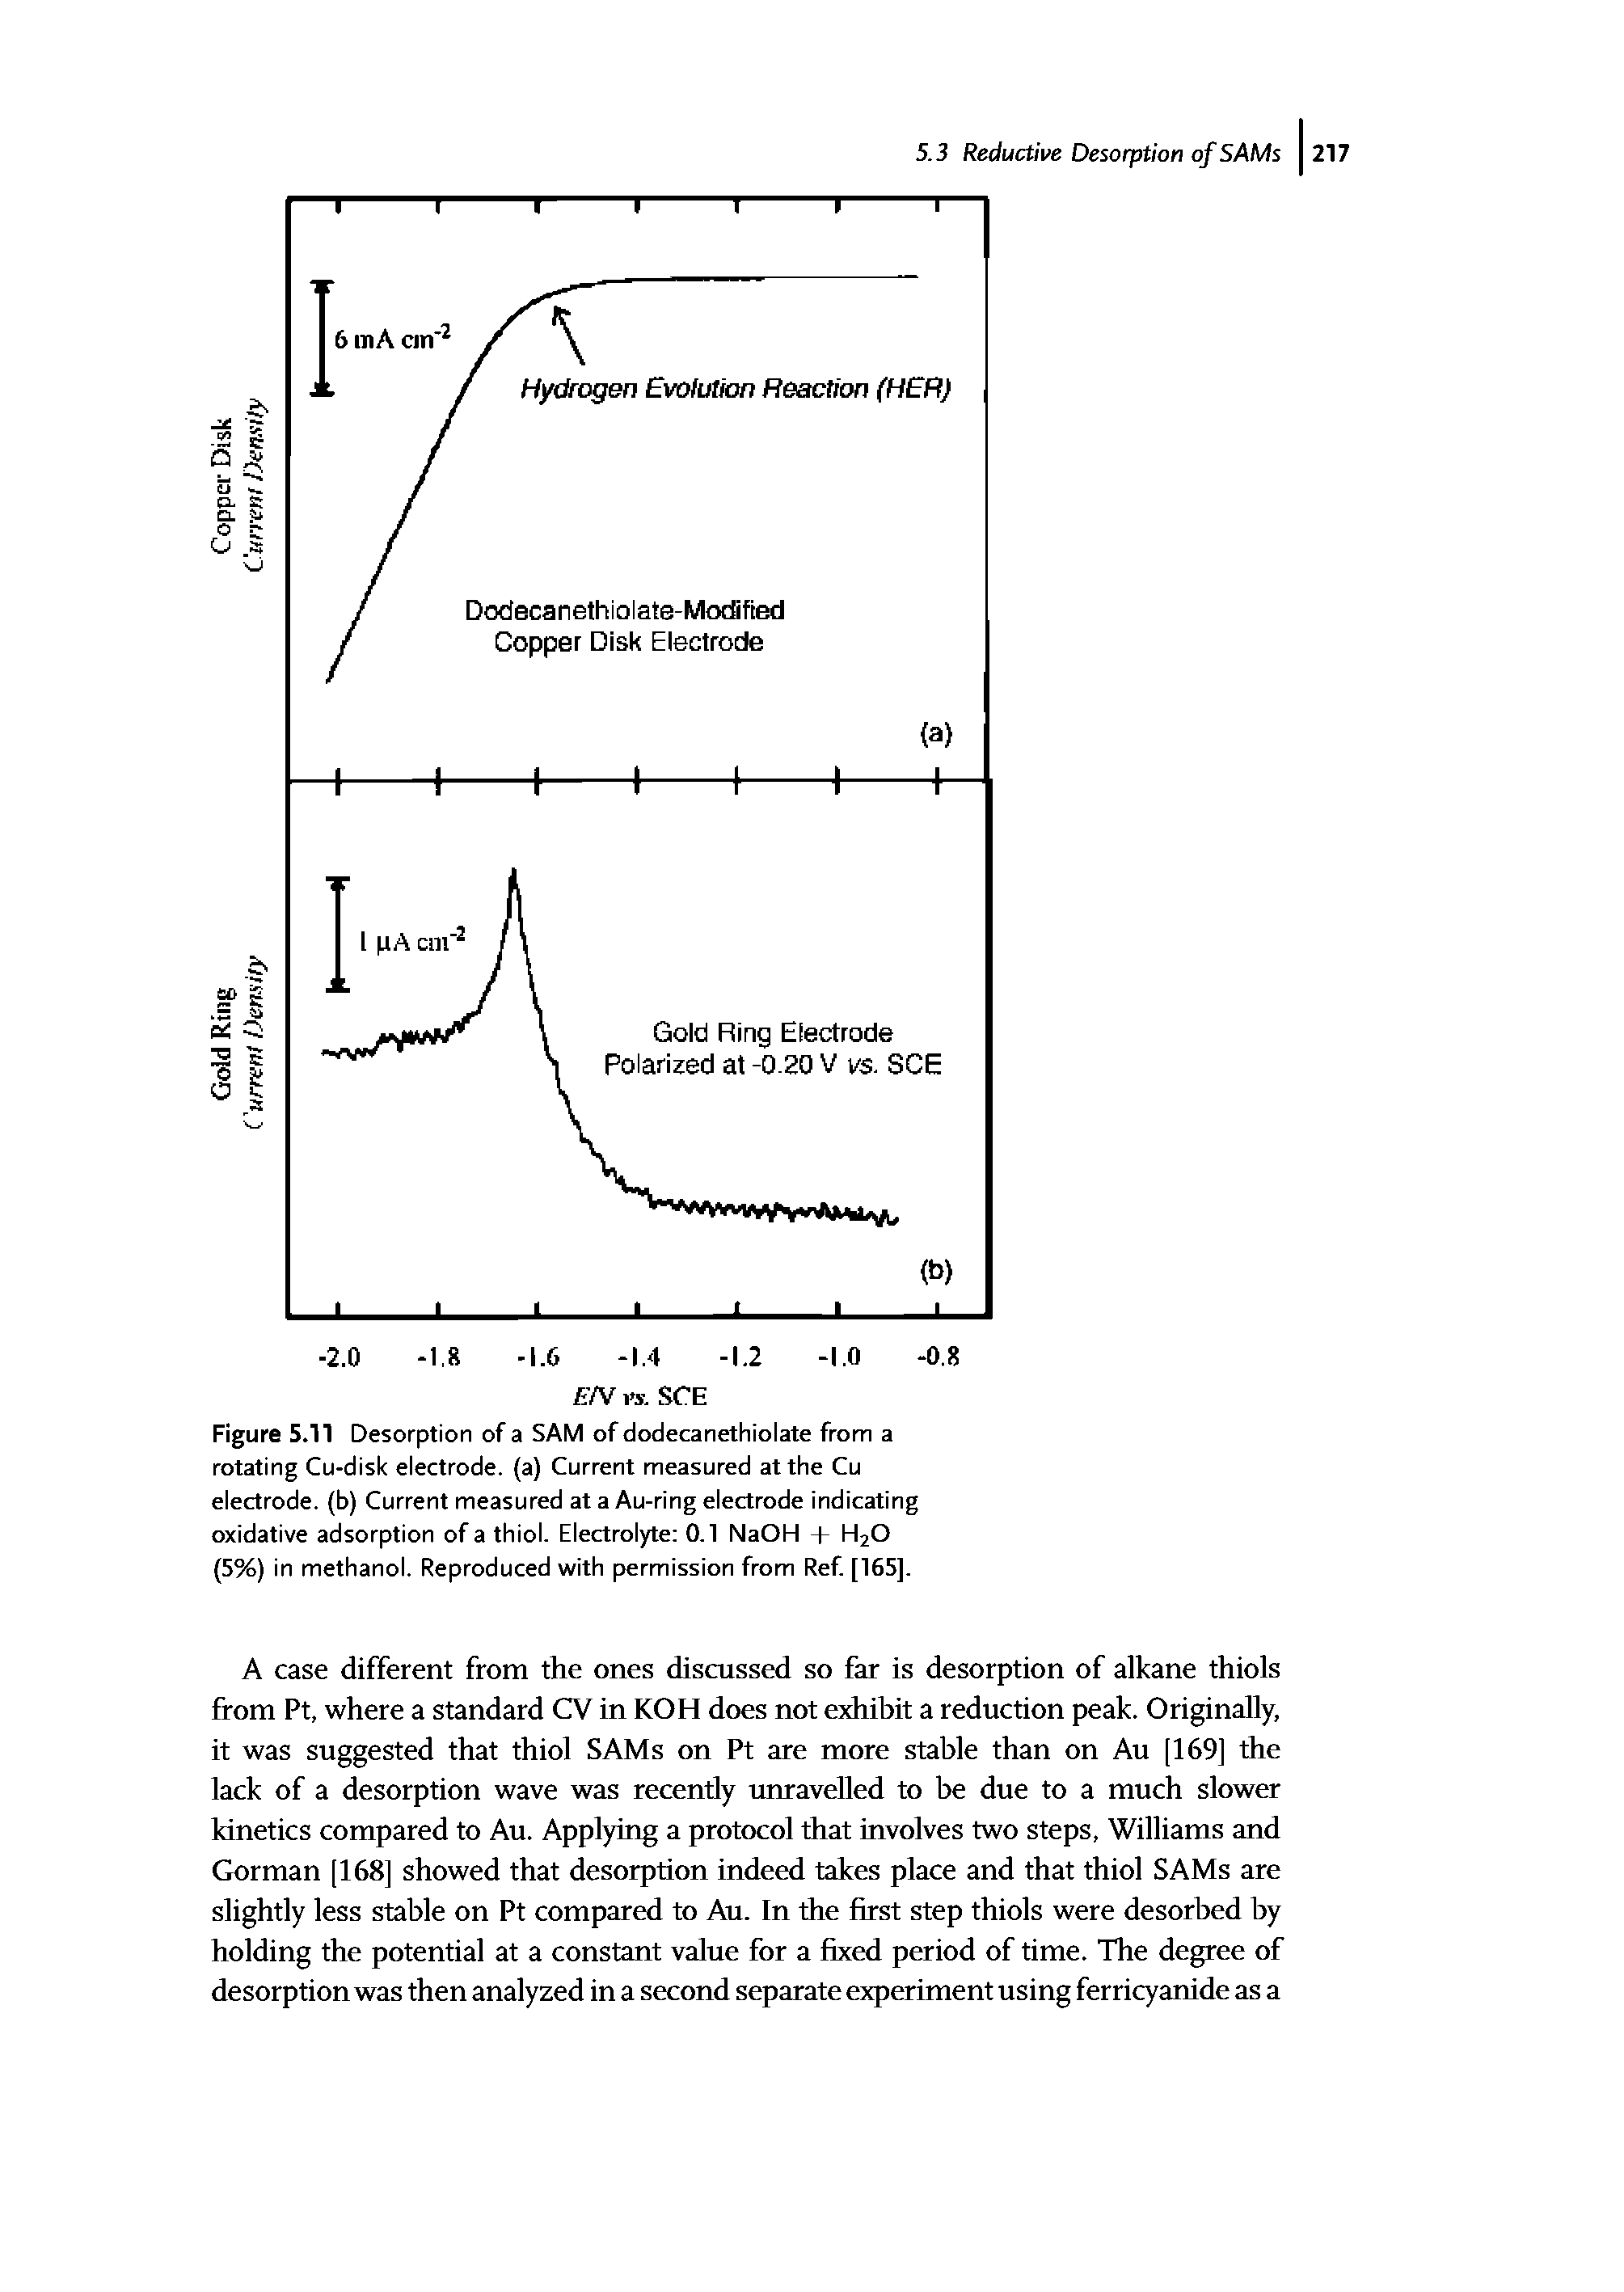 Figure 5.11 Desorption of a SAM of dodecanethiolate from a rotating Cu-disk electrode, (a) Current measured at the Cu electrode, (b) Current measured at a Au-ring electrode indicating oxidative adsorption of a thiol. Electrolyte 0.1 NaOH + H2O (5%) in methanol. Reproduced with permission from Ref [165].